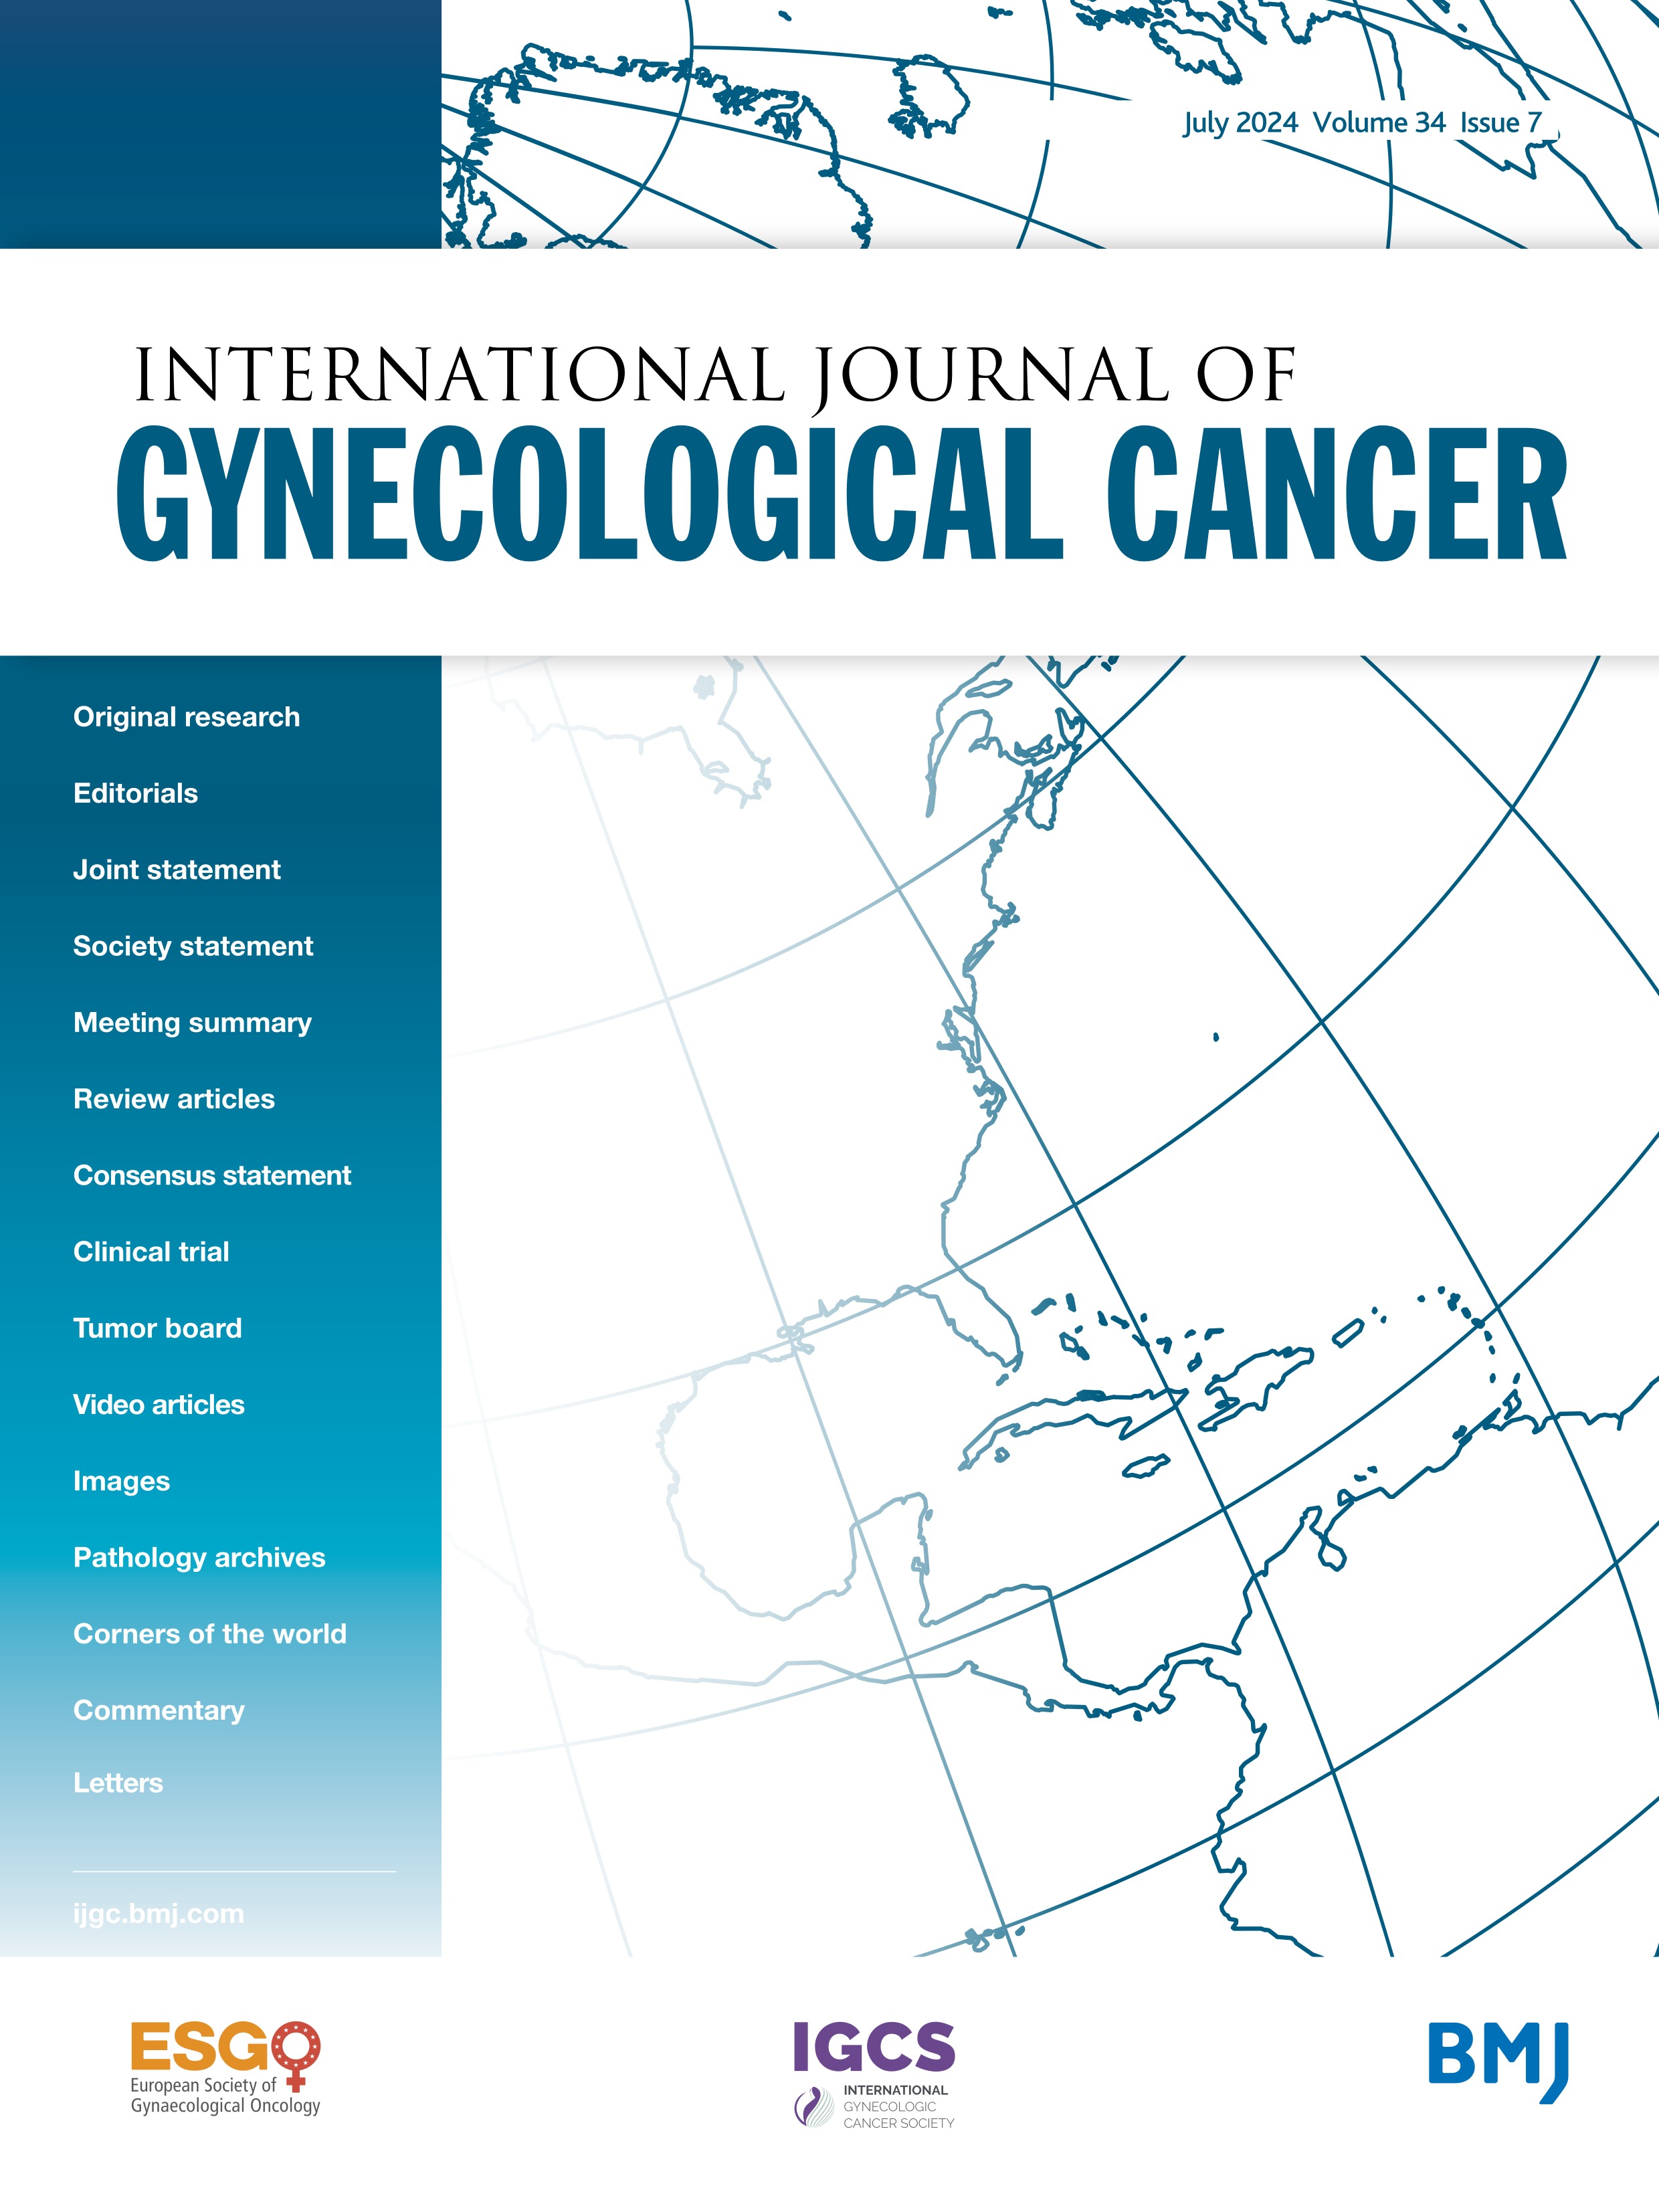 Delivery of hereditary cancer genetics services to patients newly diagnosed with ovarian and endometrial cancers at three gynecologic oncology clinics in the USA, Brazil, and Mexico